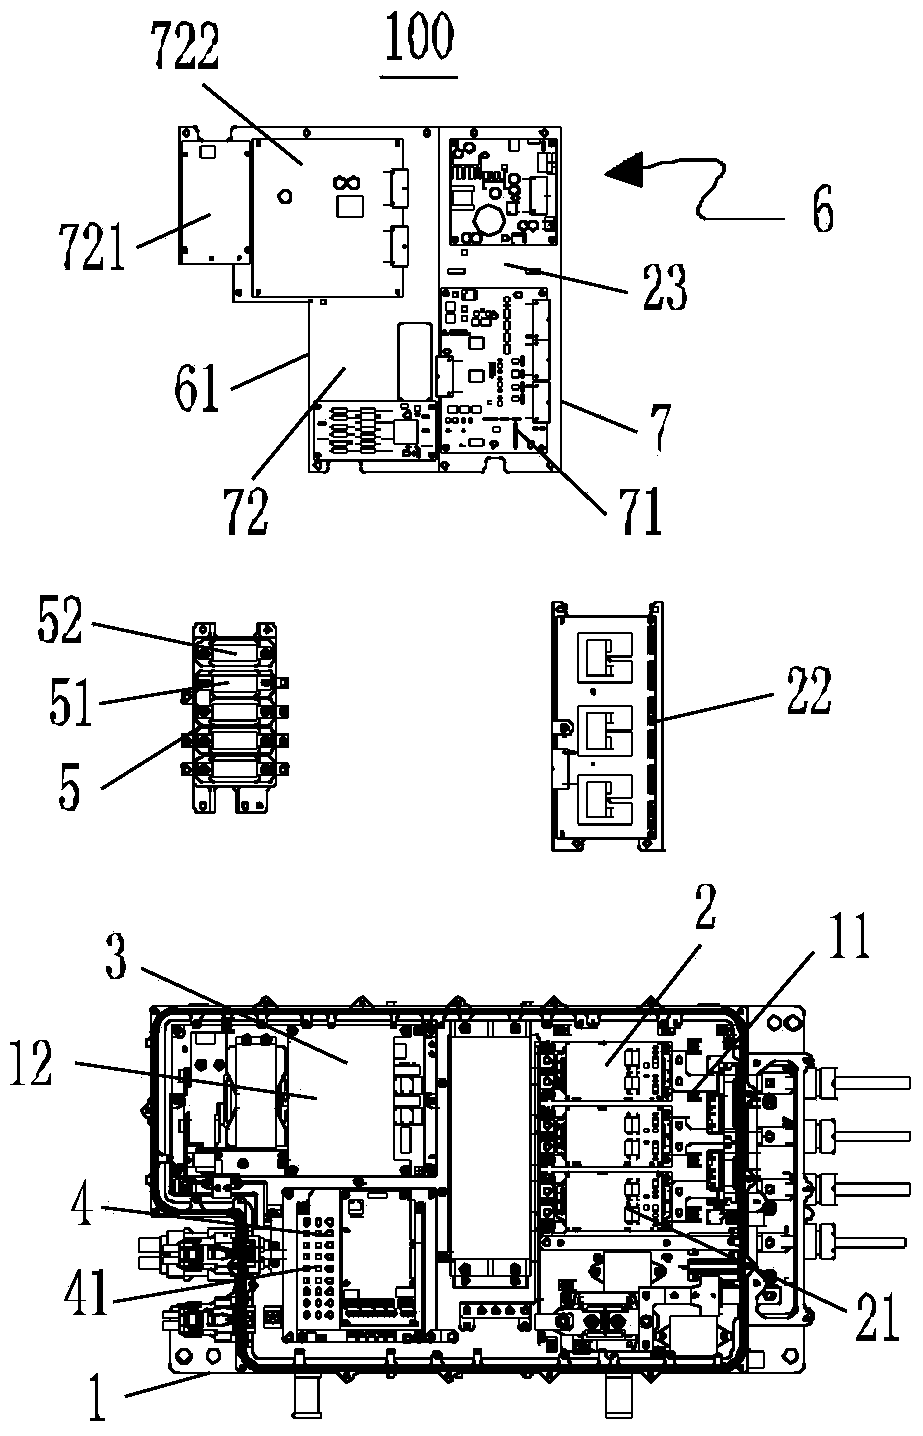 A mounting assembly for electric vehicles